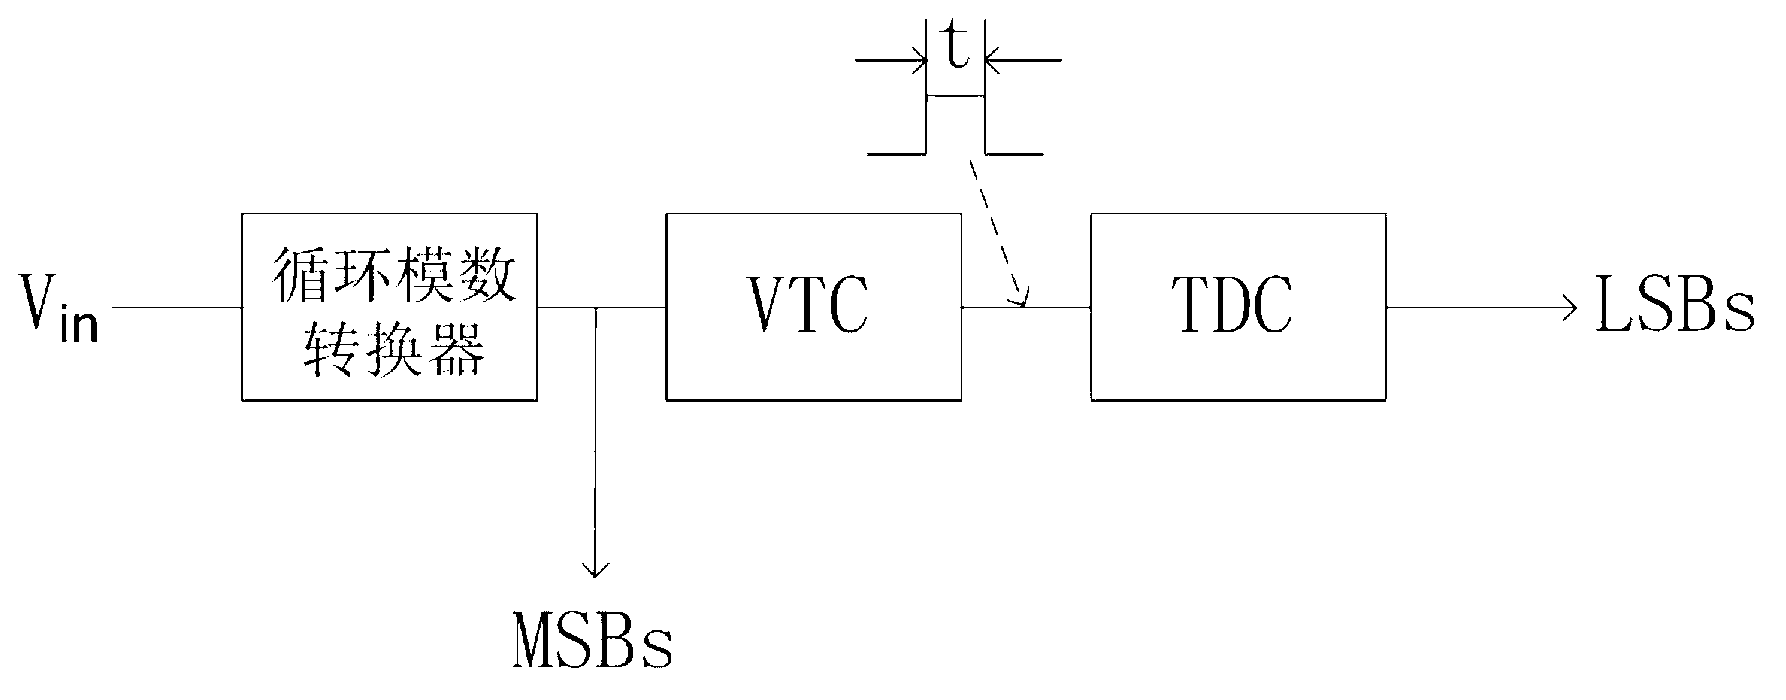 Circulation analog-to-digital converter combined with TDC (time-to-digital converter)